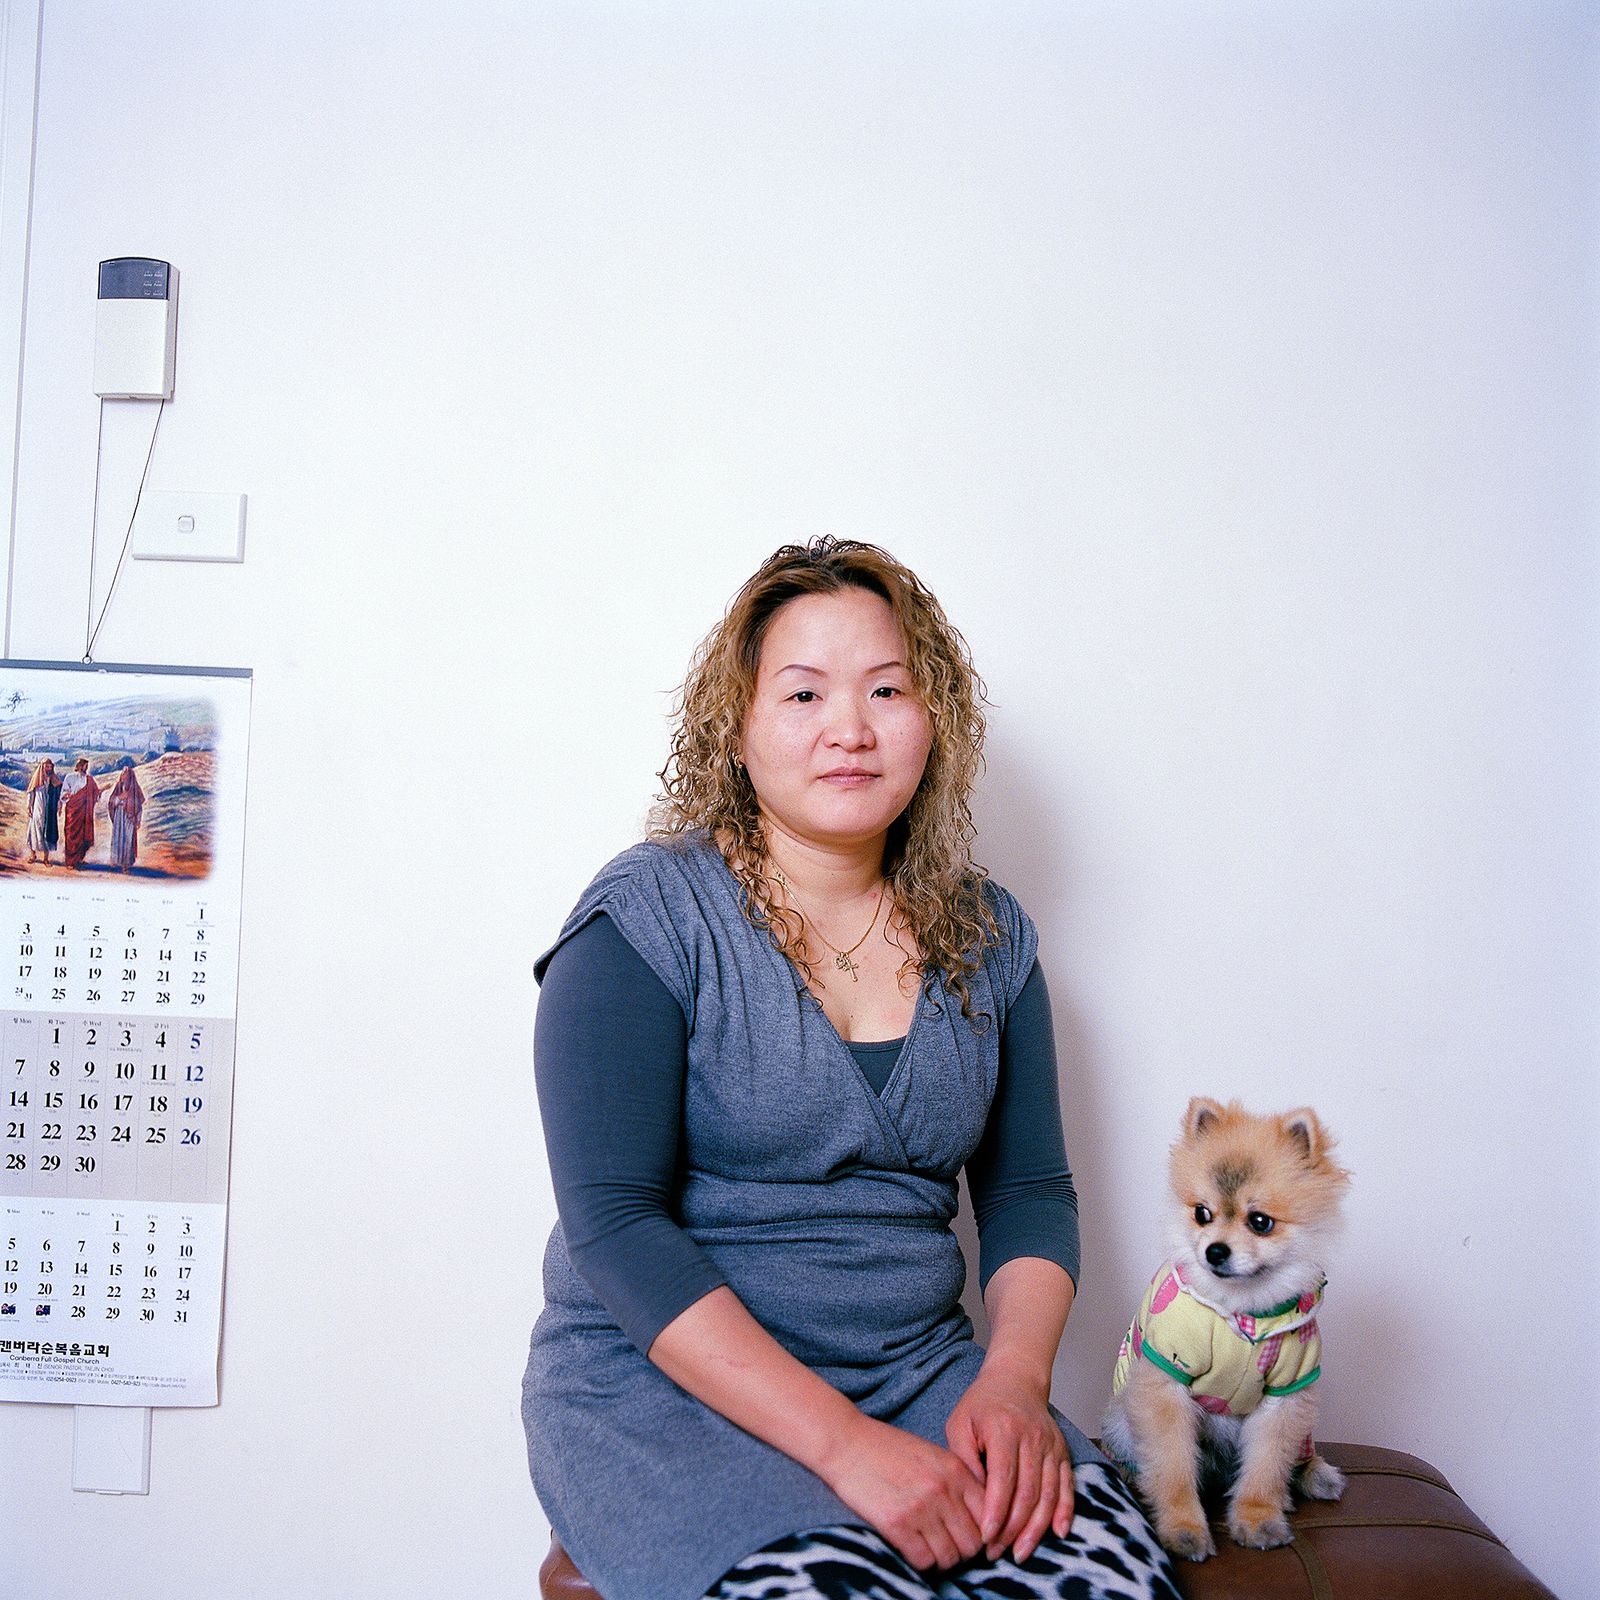 © Lee Grant - Image from the The Korea Project (working title) photography project